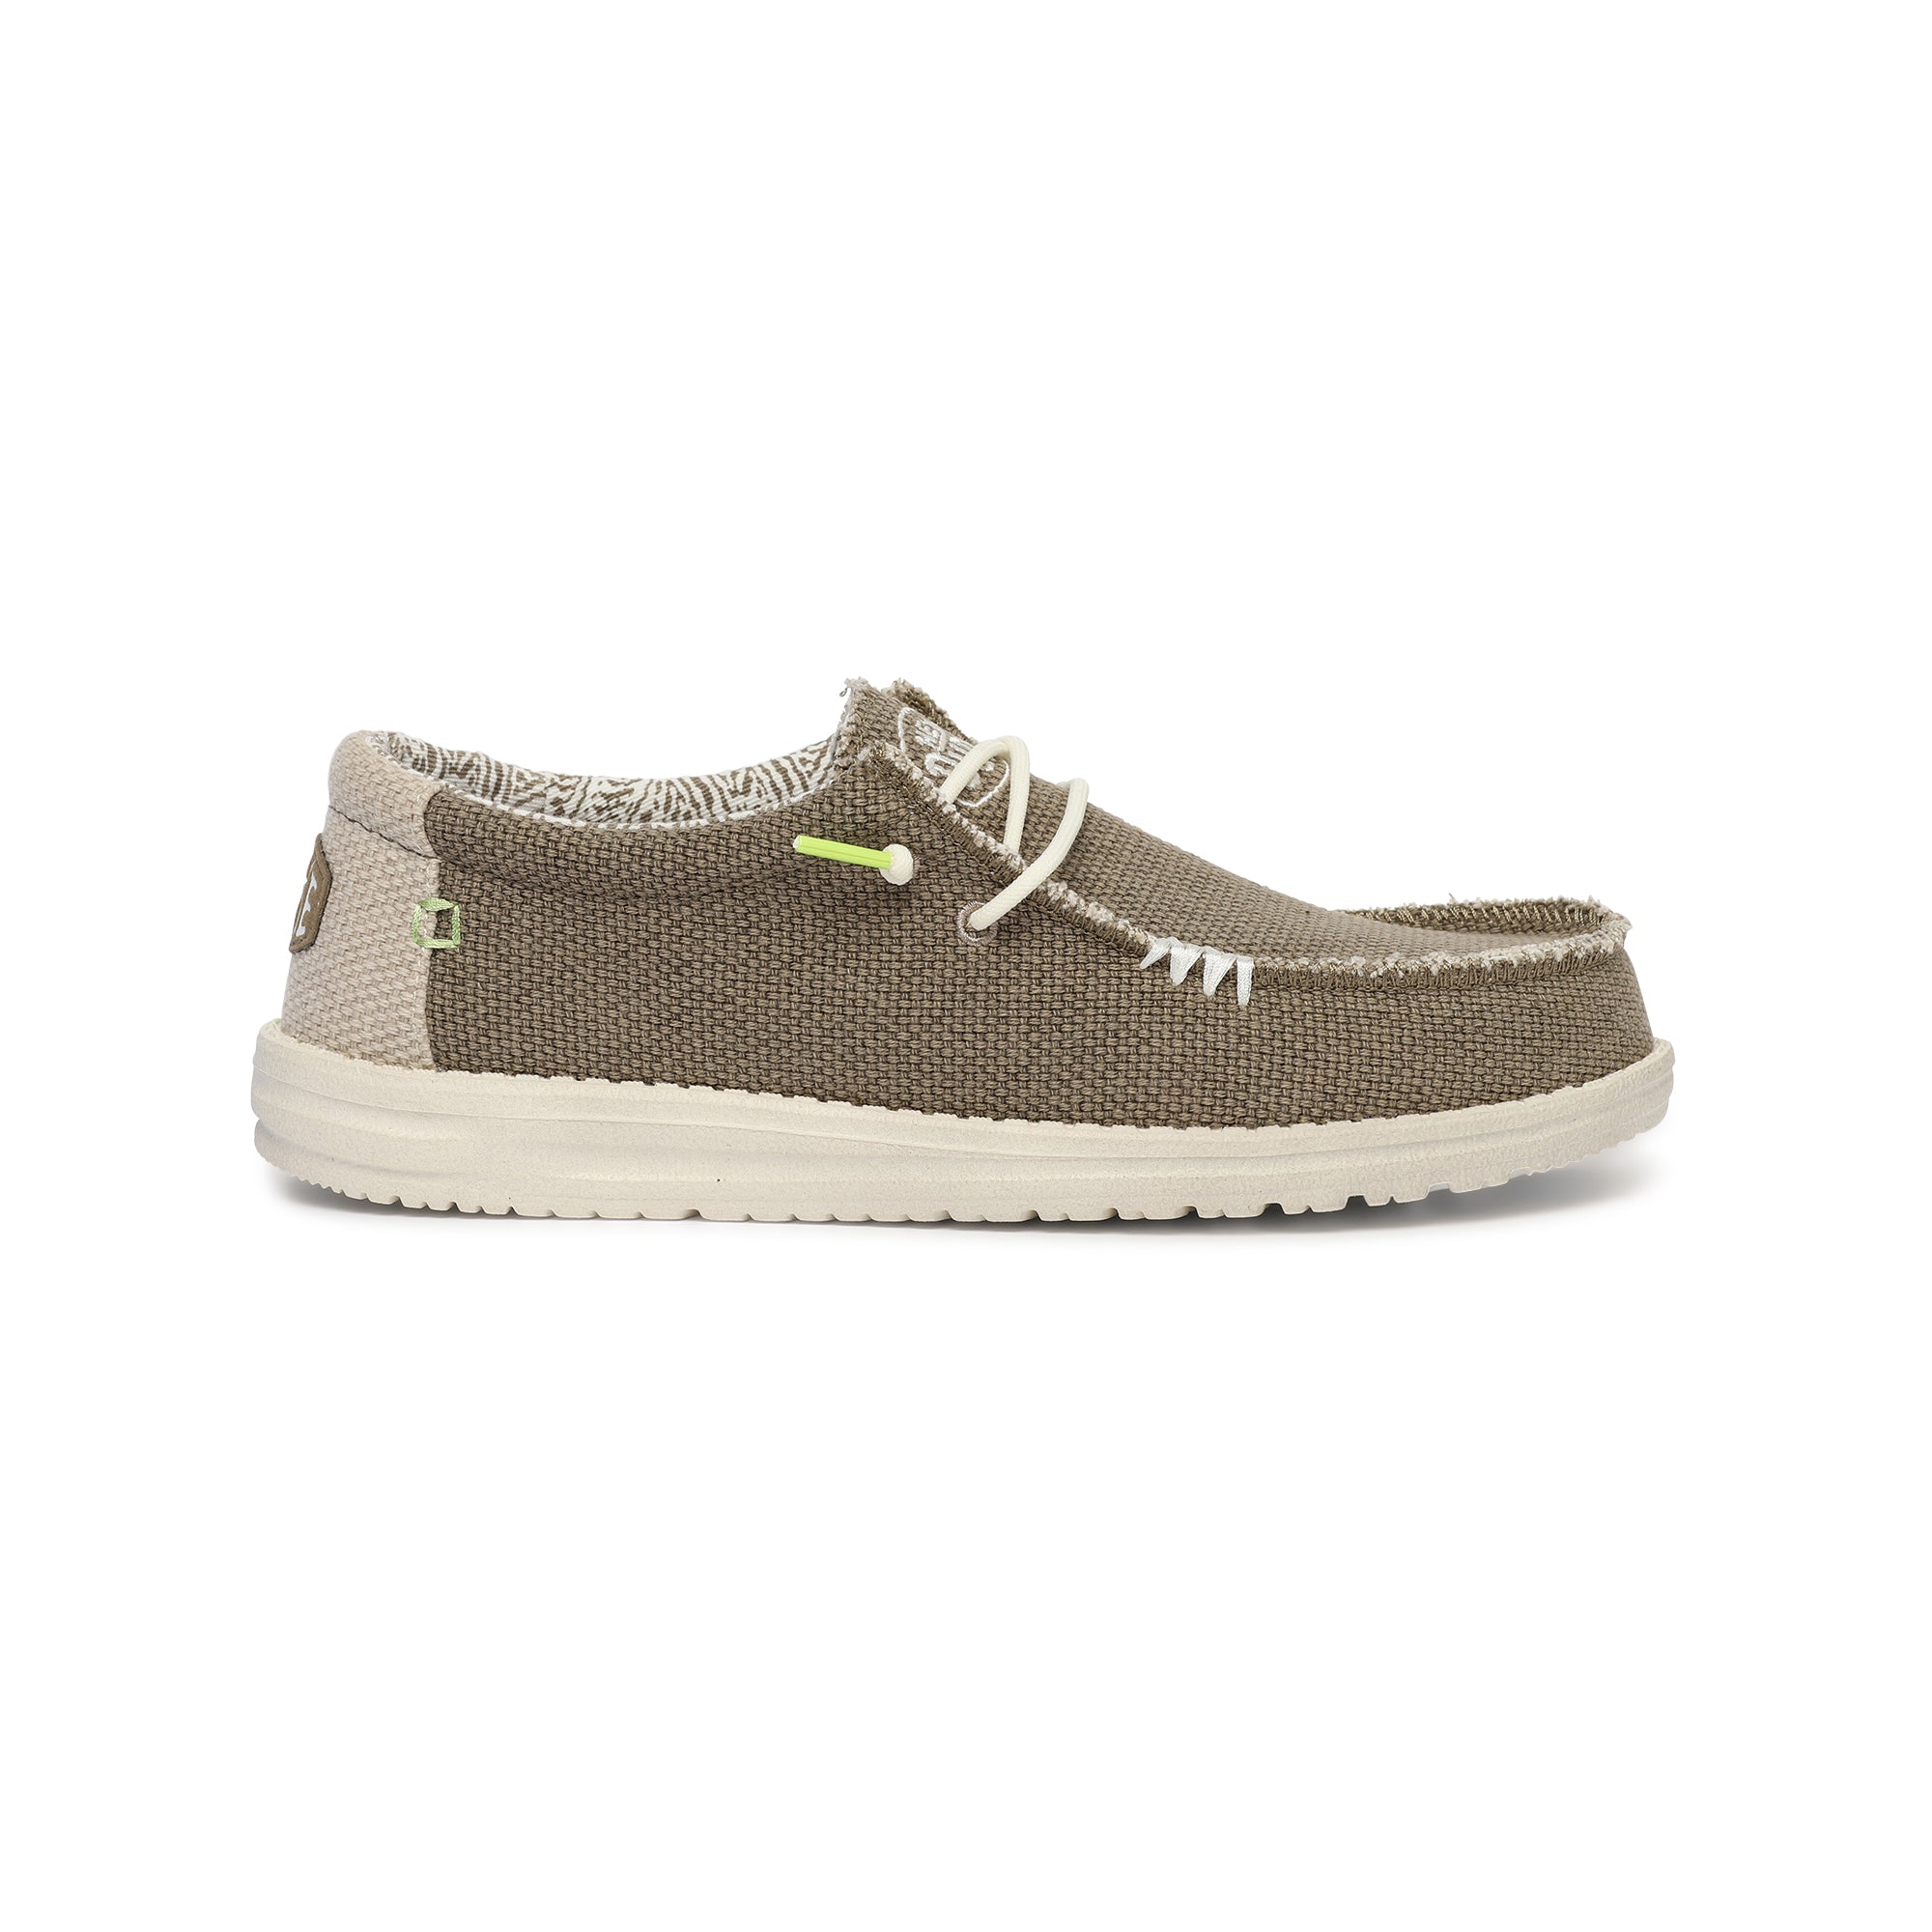 sneakers HEYDUDE WALLY BRAIDED 40003/2BSFOSSIL